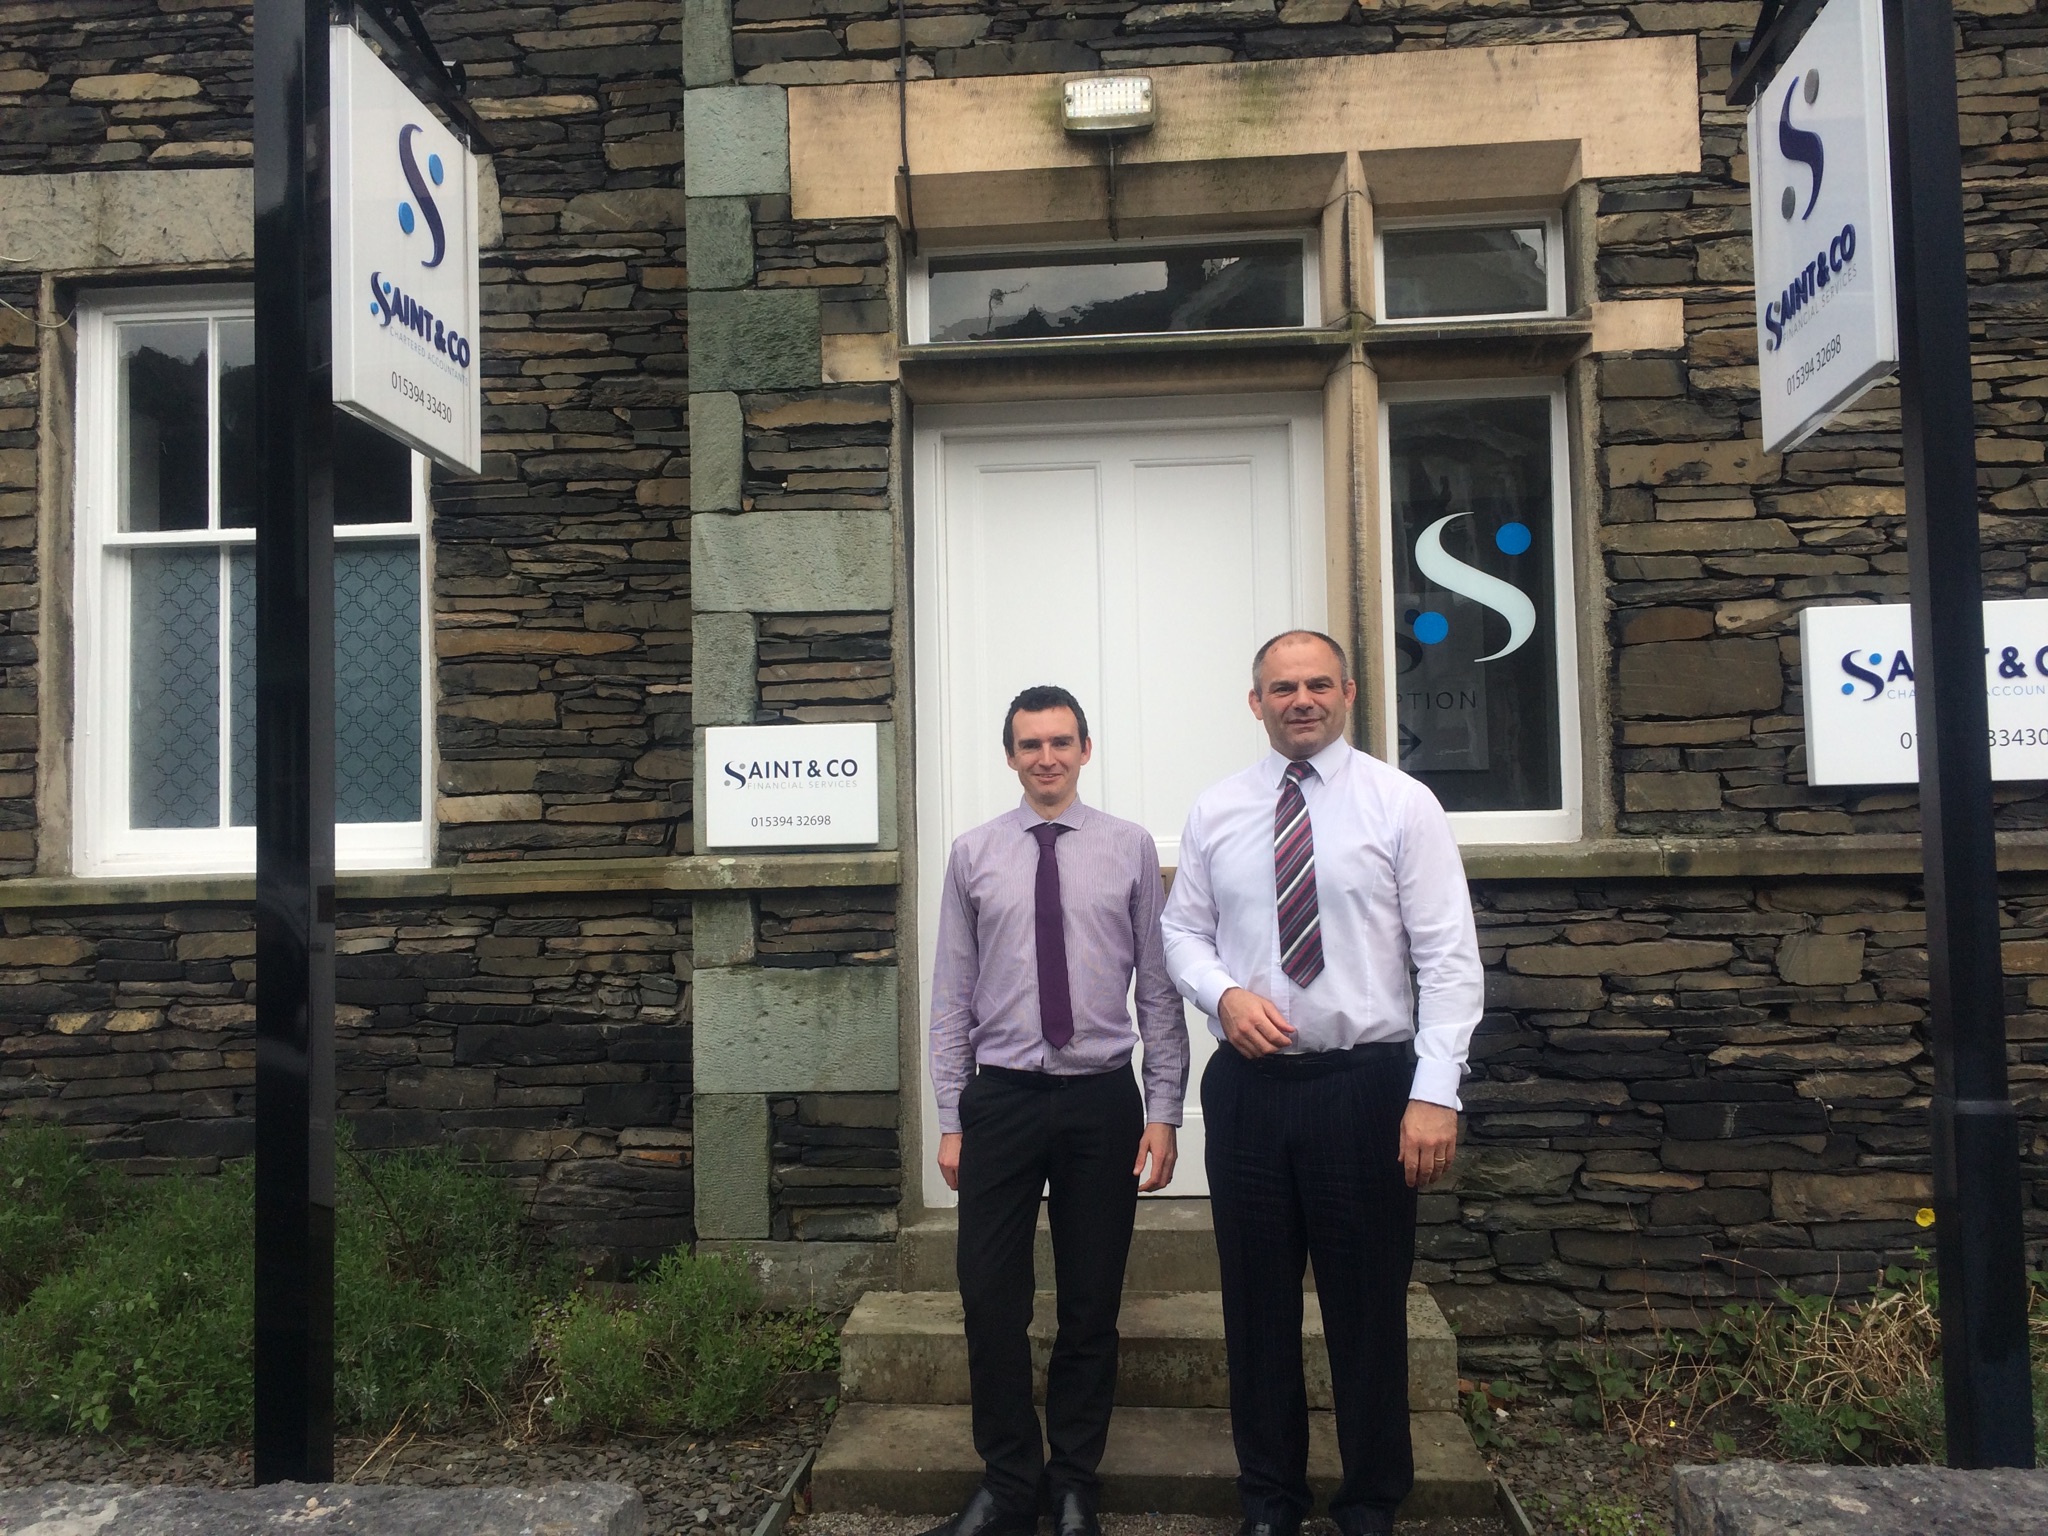 Darren Little is pictured above left with Ian Thompson outside our Ambleside Office